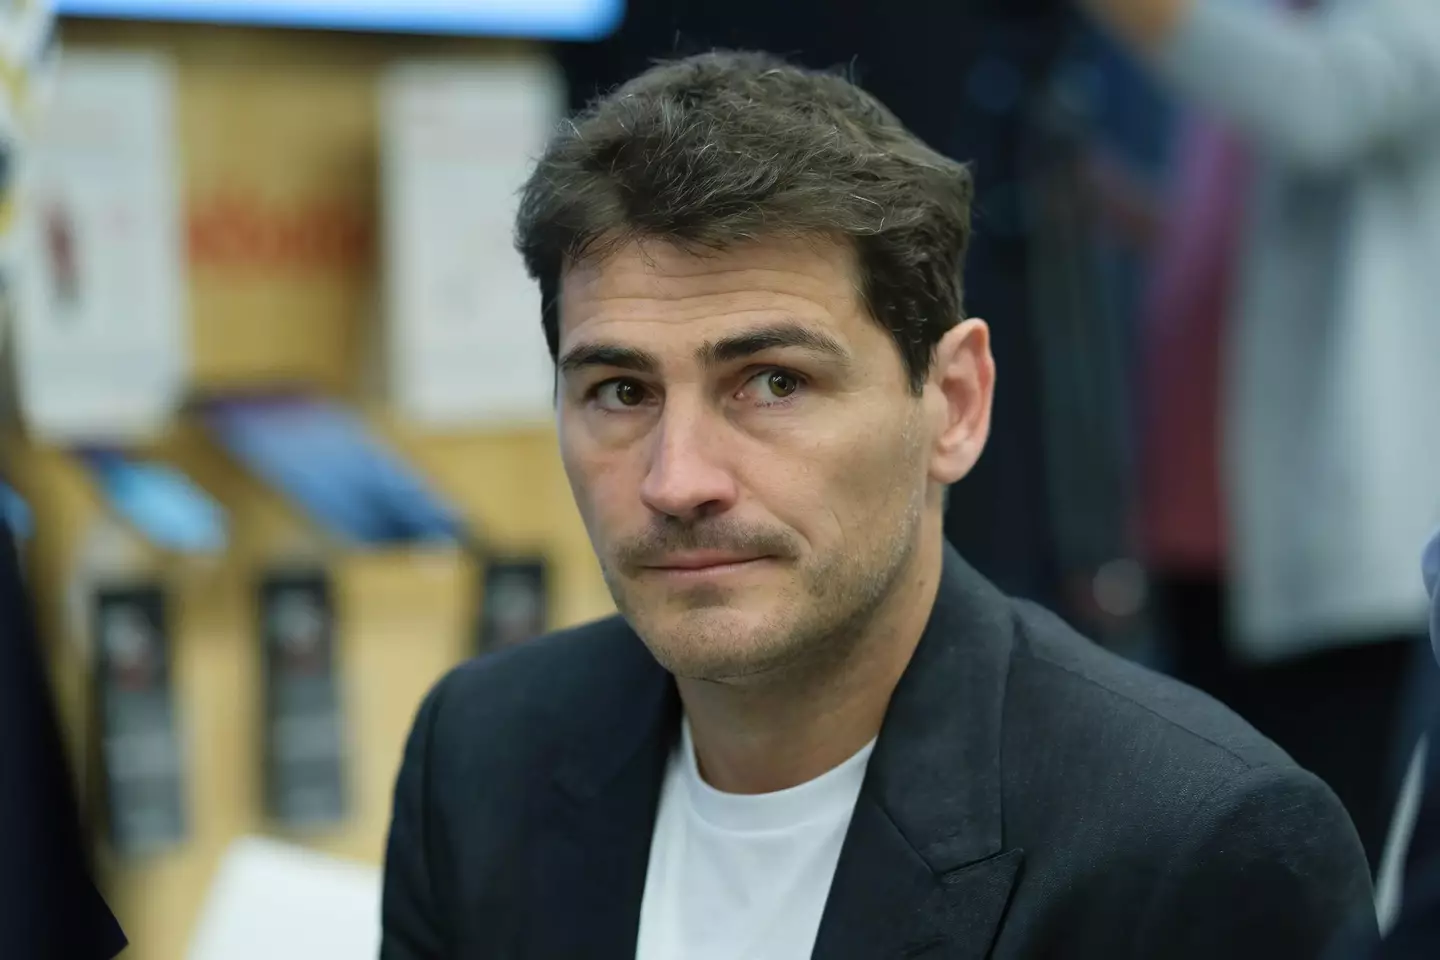 Casillas said he'd been hacked as the reason for a tweet announcing he was gay.